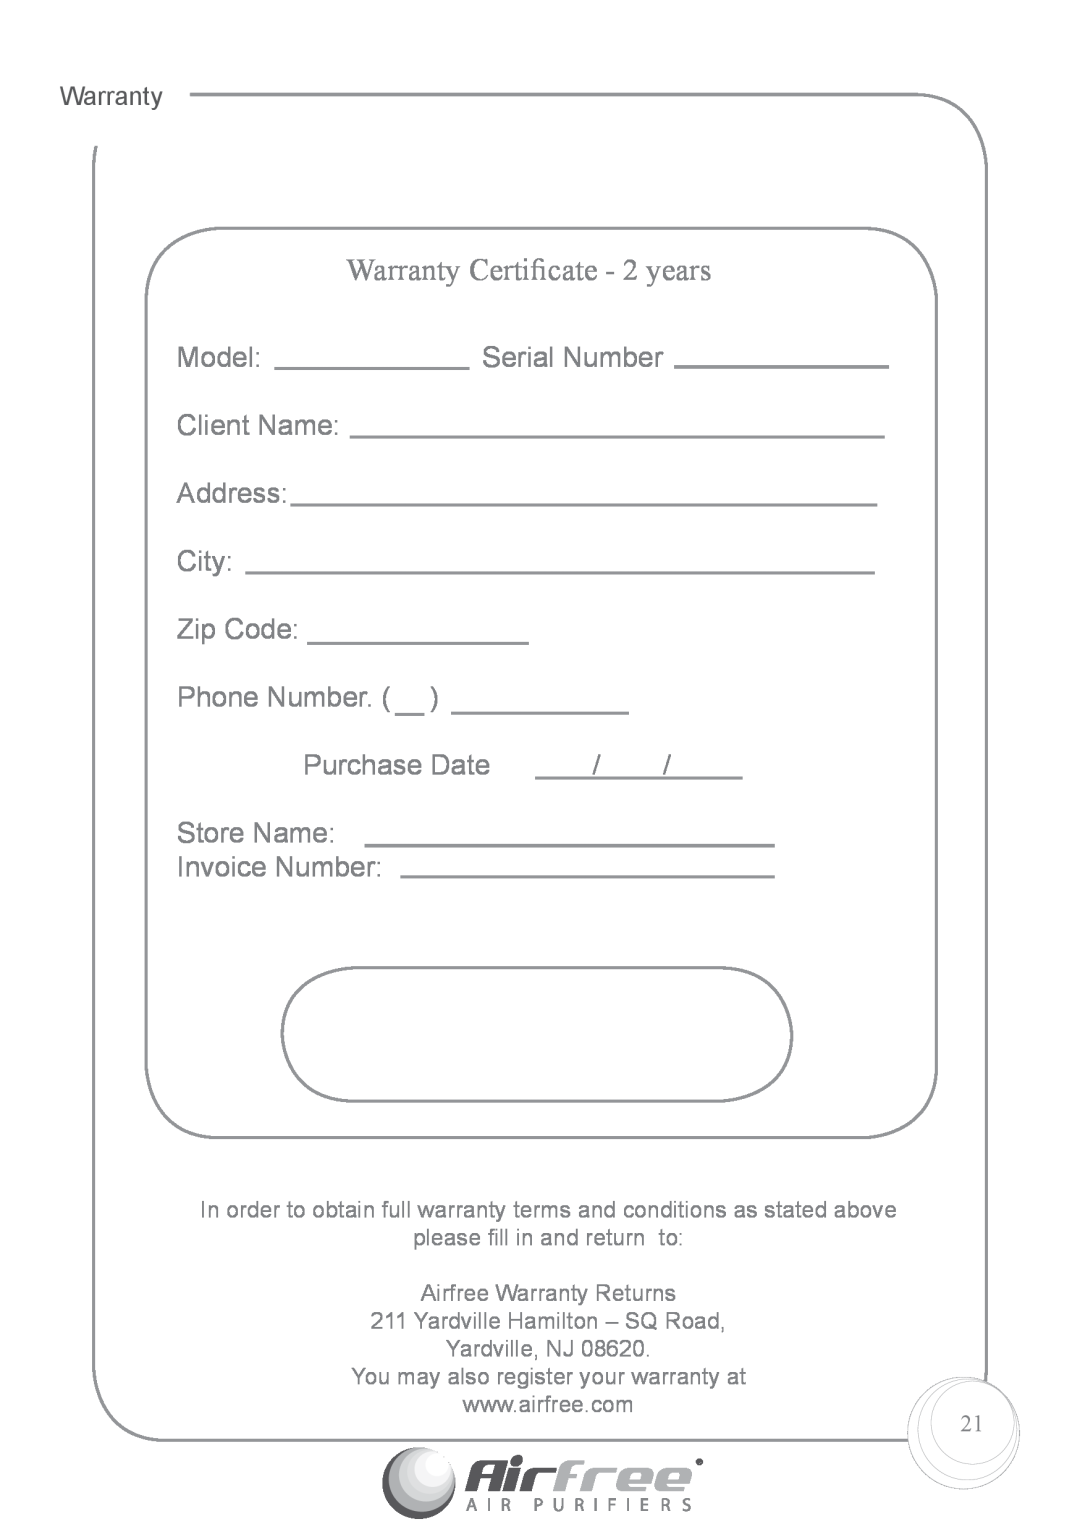 Airfree p1000 Warranty Certiﬁcate - 2 years, Model, Serial Number, Client Name Address City, Zip Code, Phone Number 